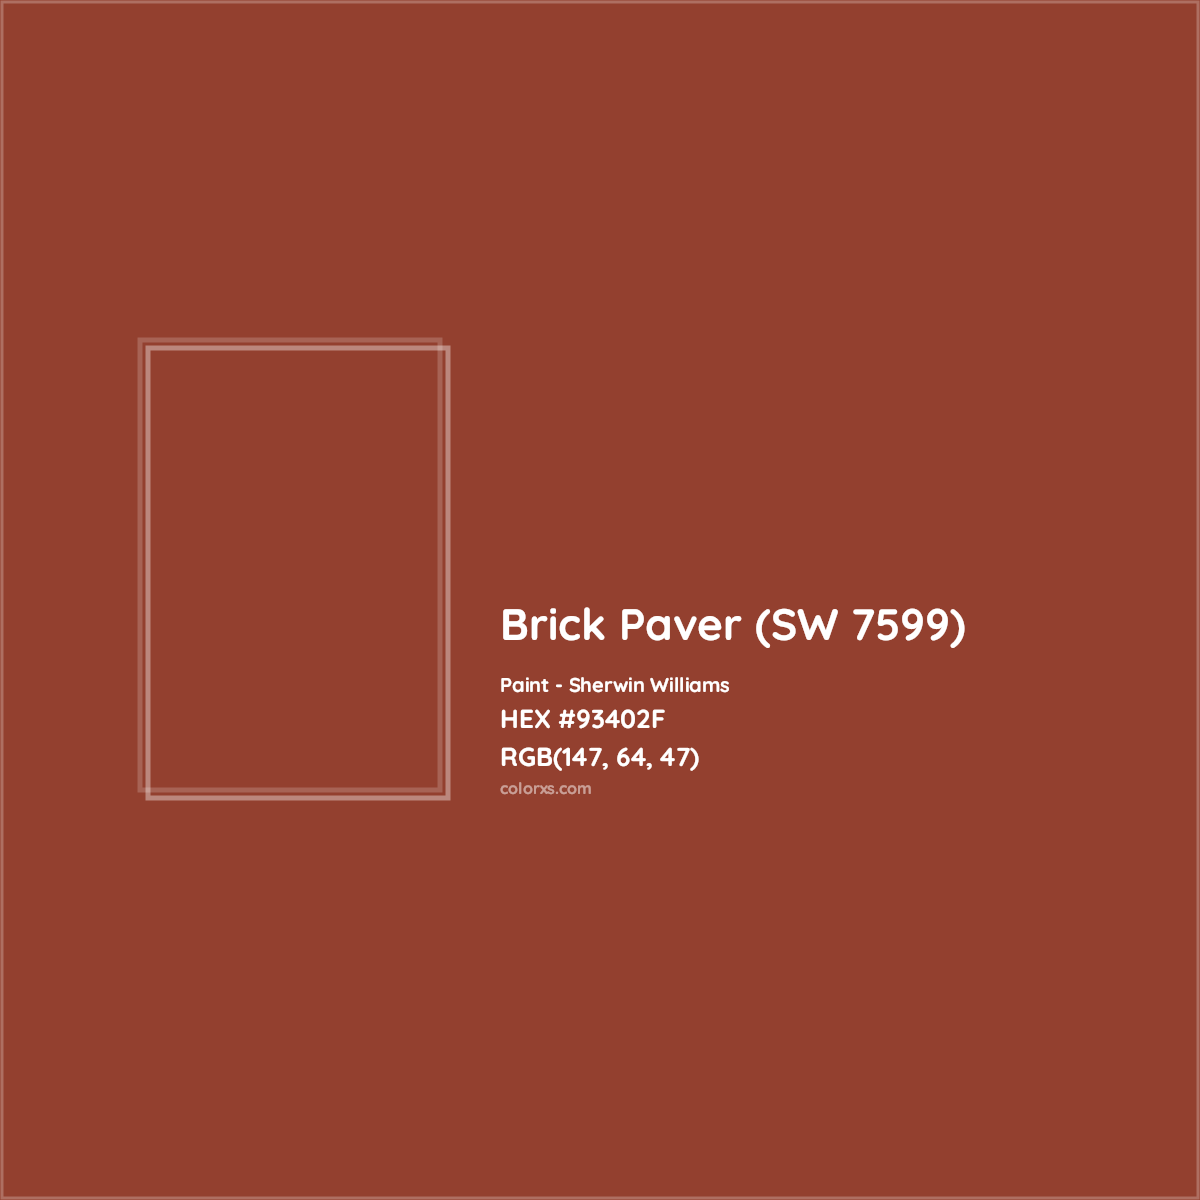 HEX #93402F Brick Paver (SW 7599) Paint Sherwin Williams - Color Code